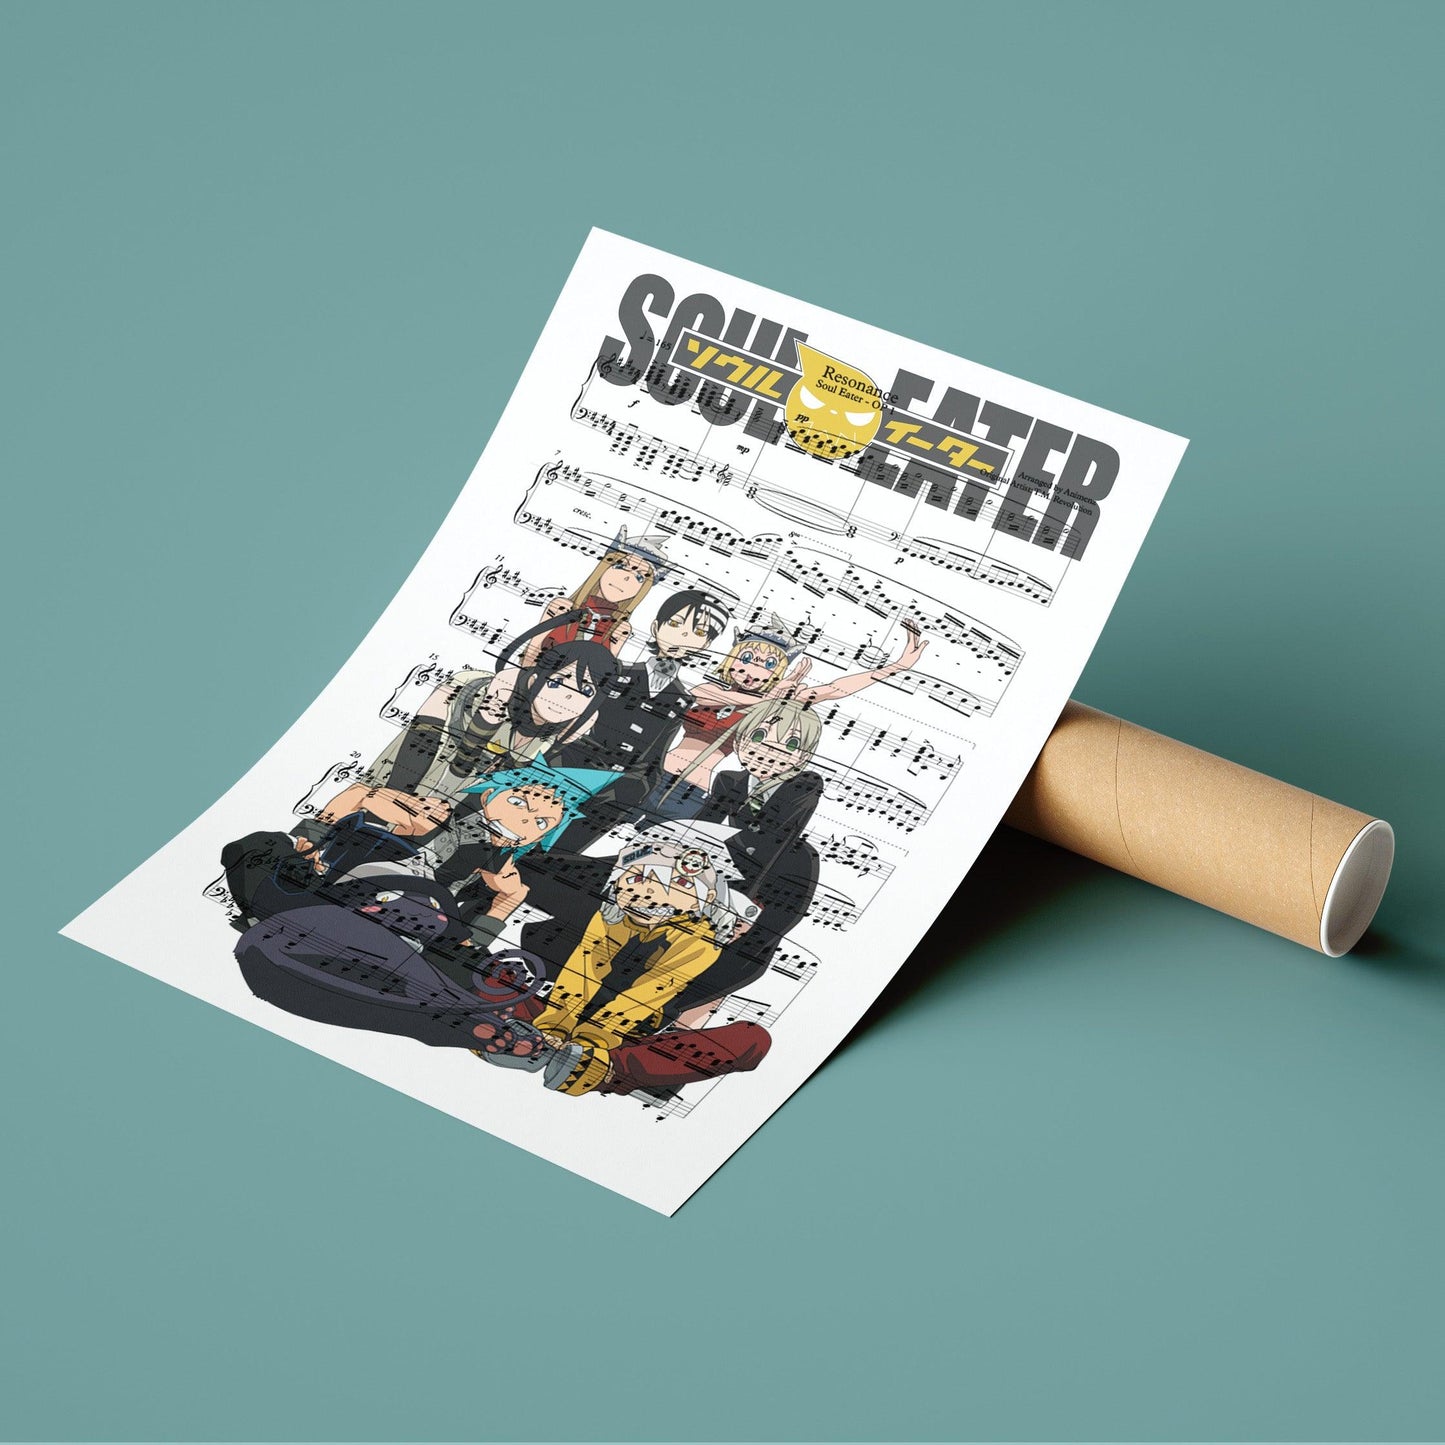 Soul Eater – Resonance Print | Song Music Sheet Notes Print  Everyone has a favorite song and now you can show the score as printed staff. The personal favorite song sheet print shows the song chosen as the score. 